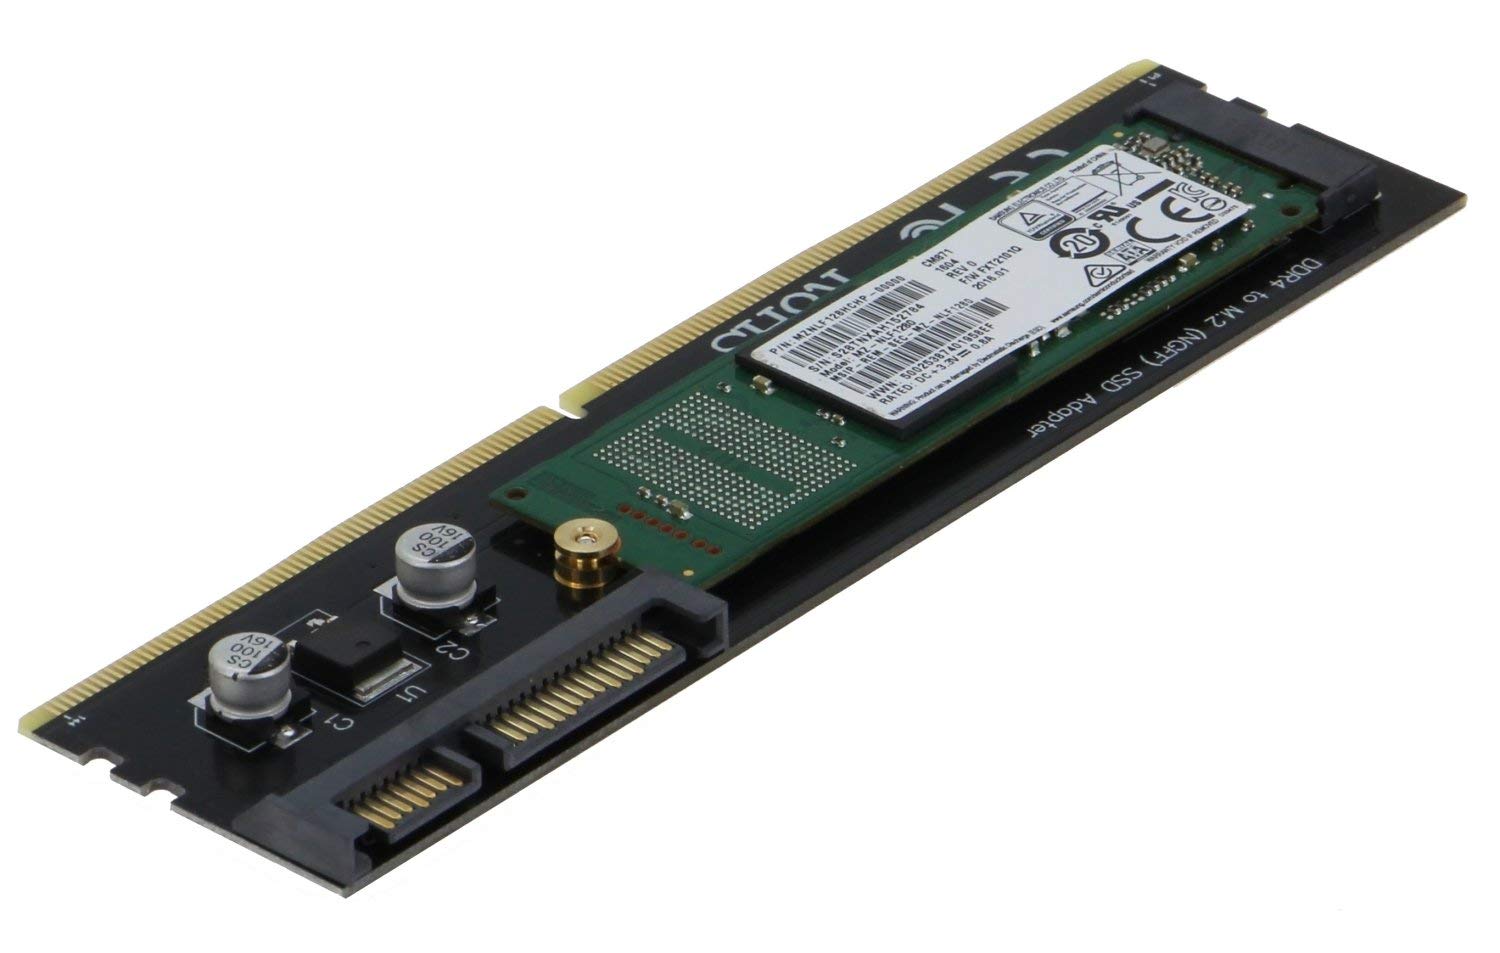 SEDNA - DDR4 Slot Mounting Adapter for M2 SSD